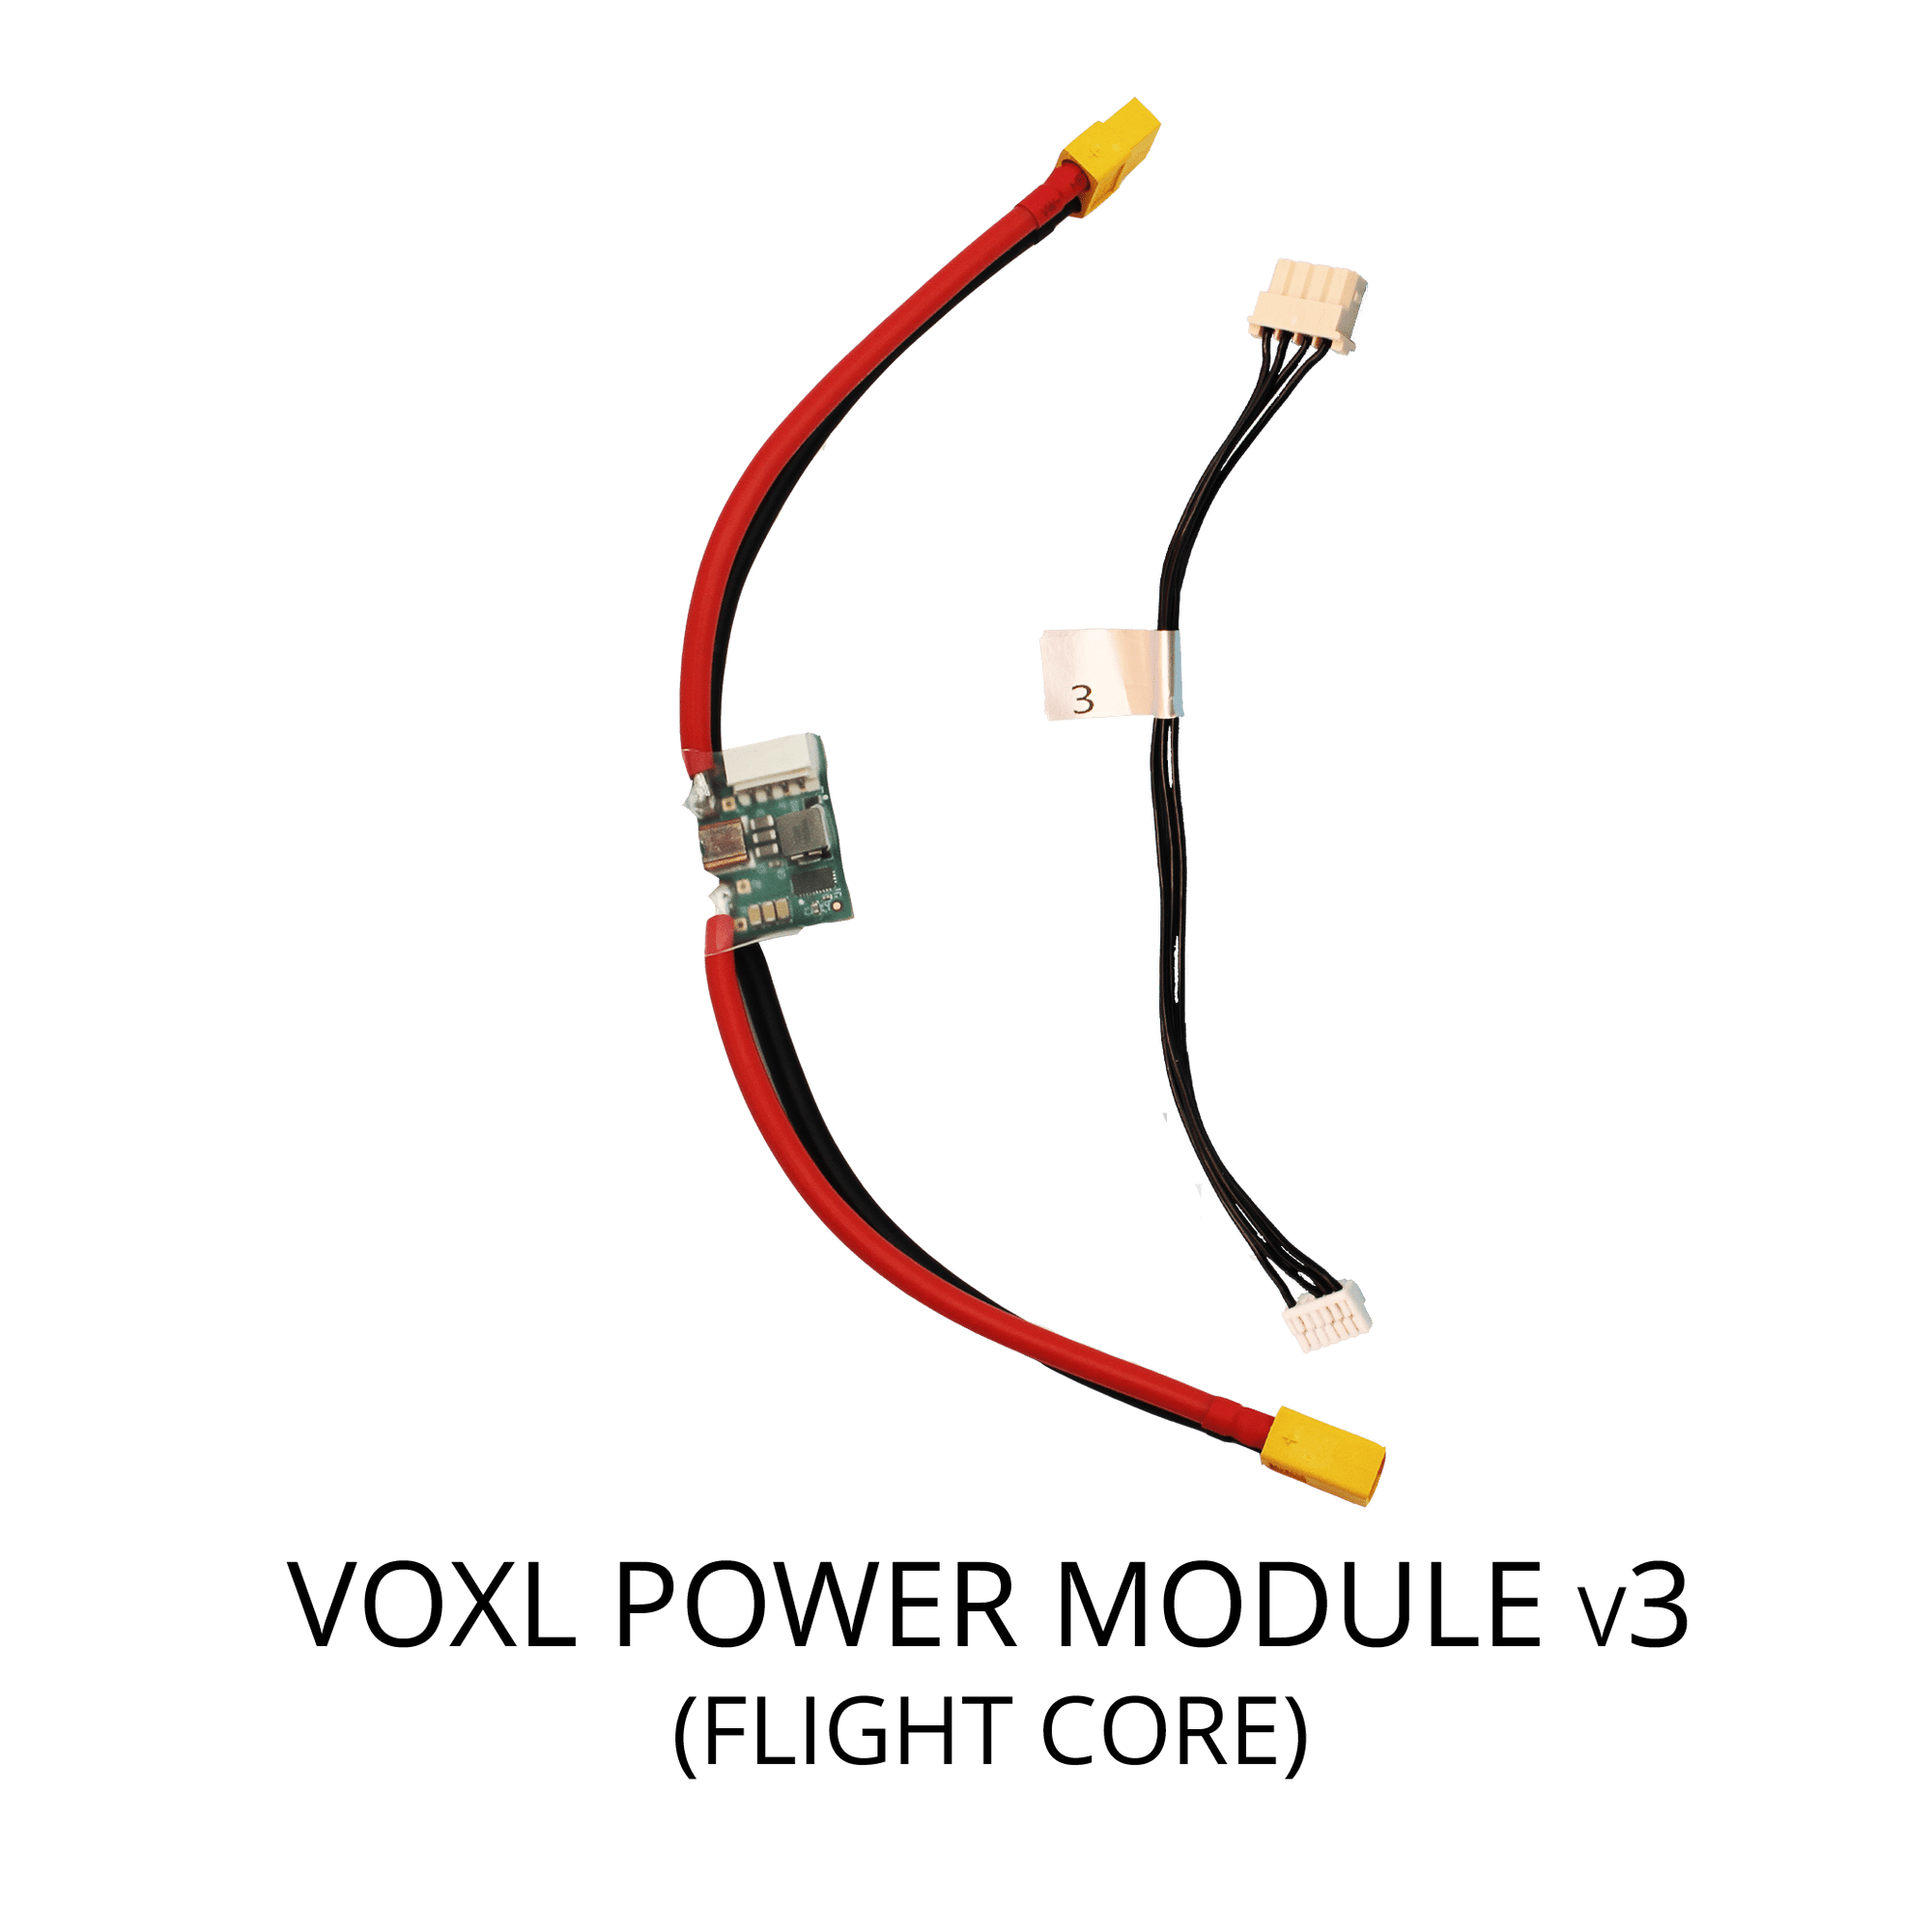 ModalAI, Inc. Accessory For Flight Core (4pin to 6-pin JST cable) Power Module v3 for Companion Computer, Flight Controller and ESCs (Drones and Robots)